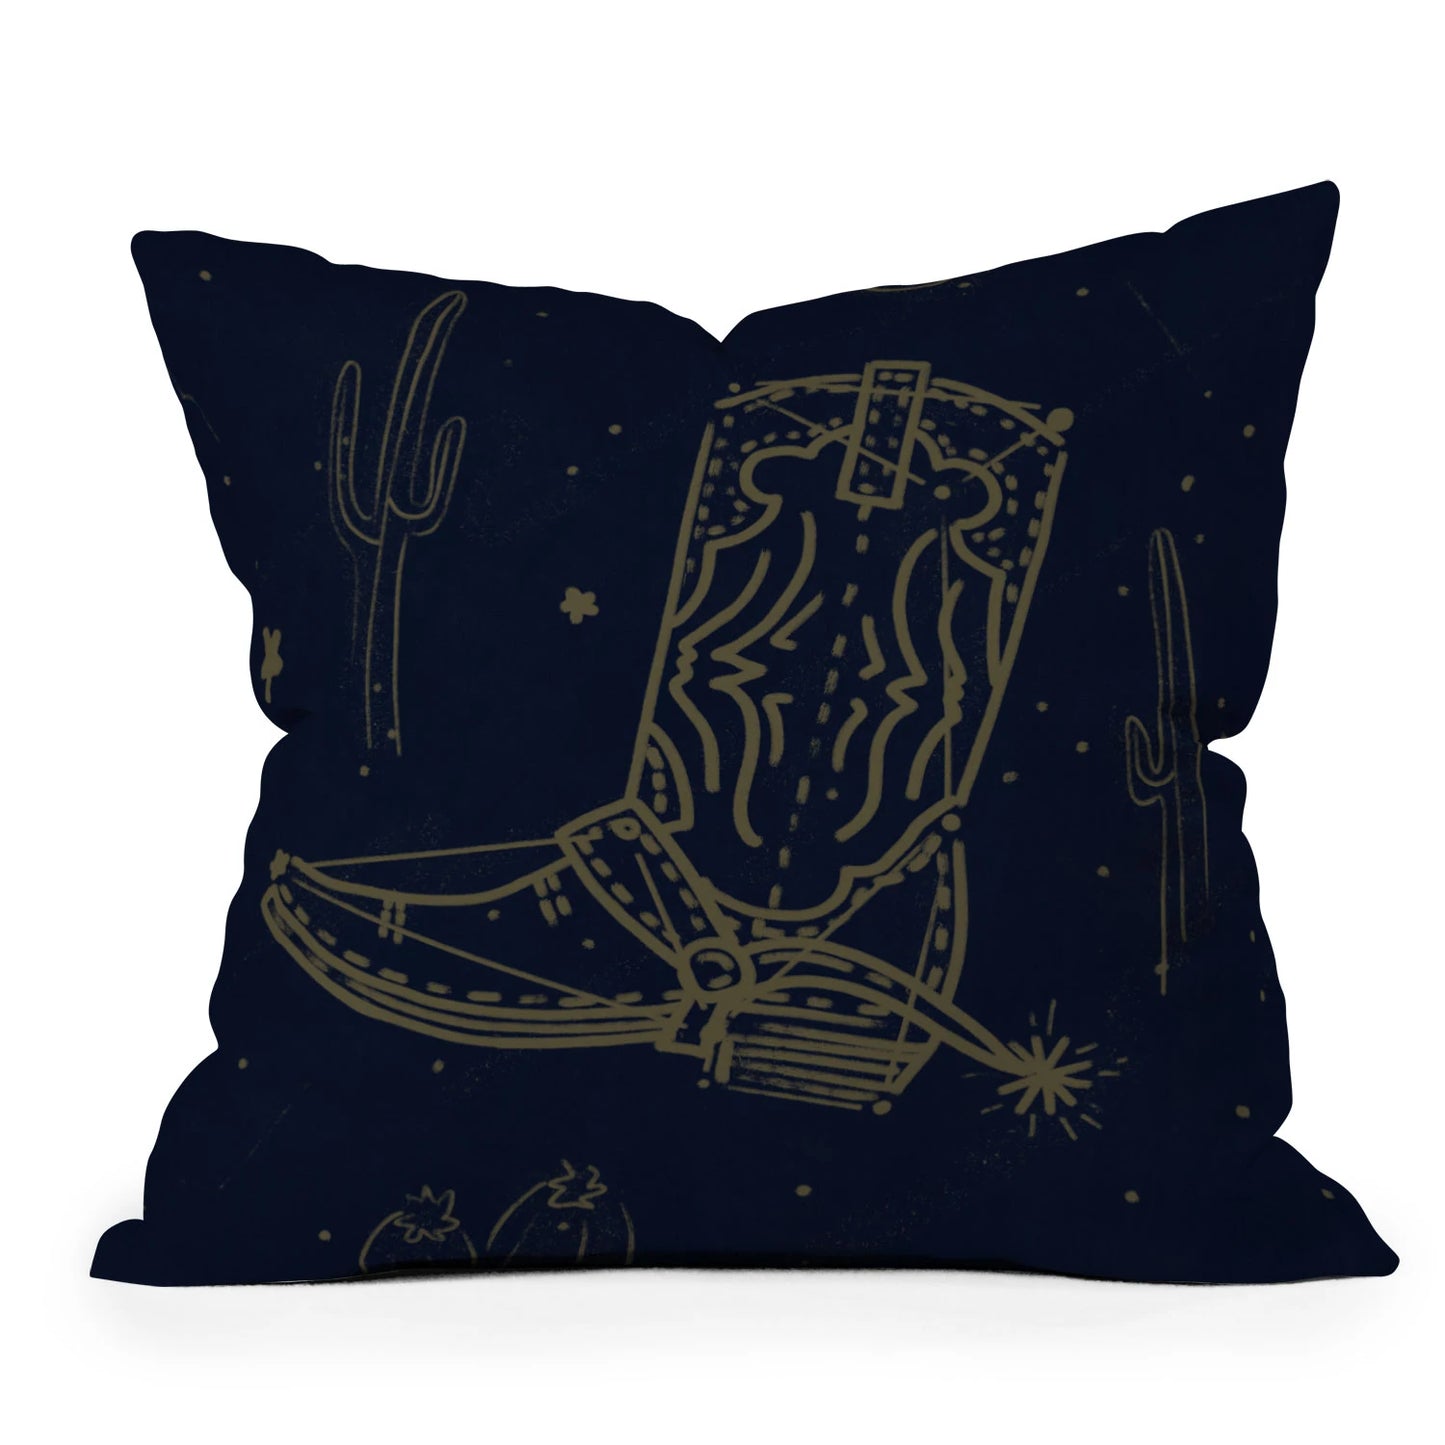 Follow The Western Star Pillow Choice of Sizes